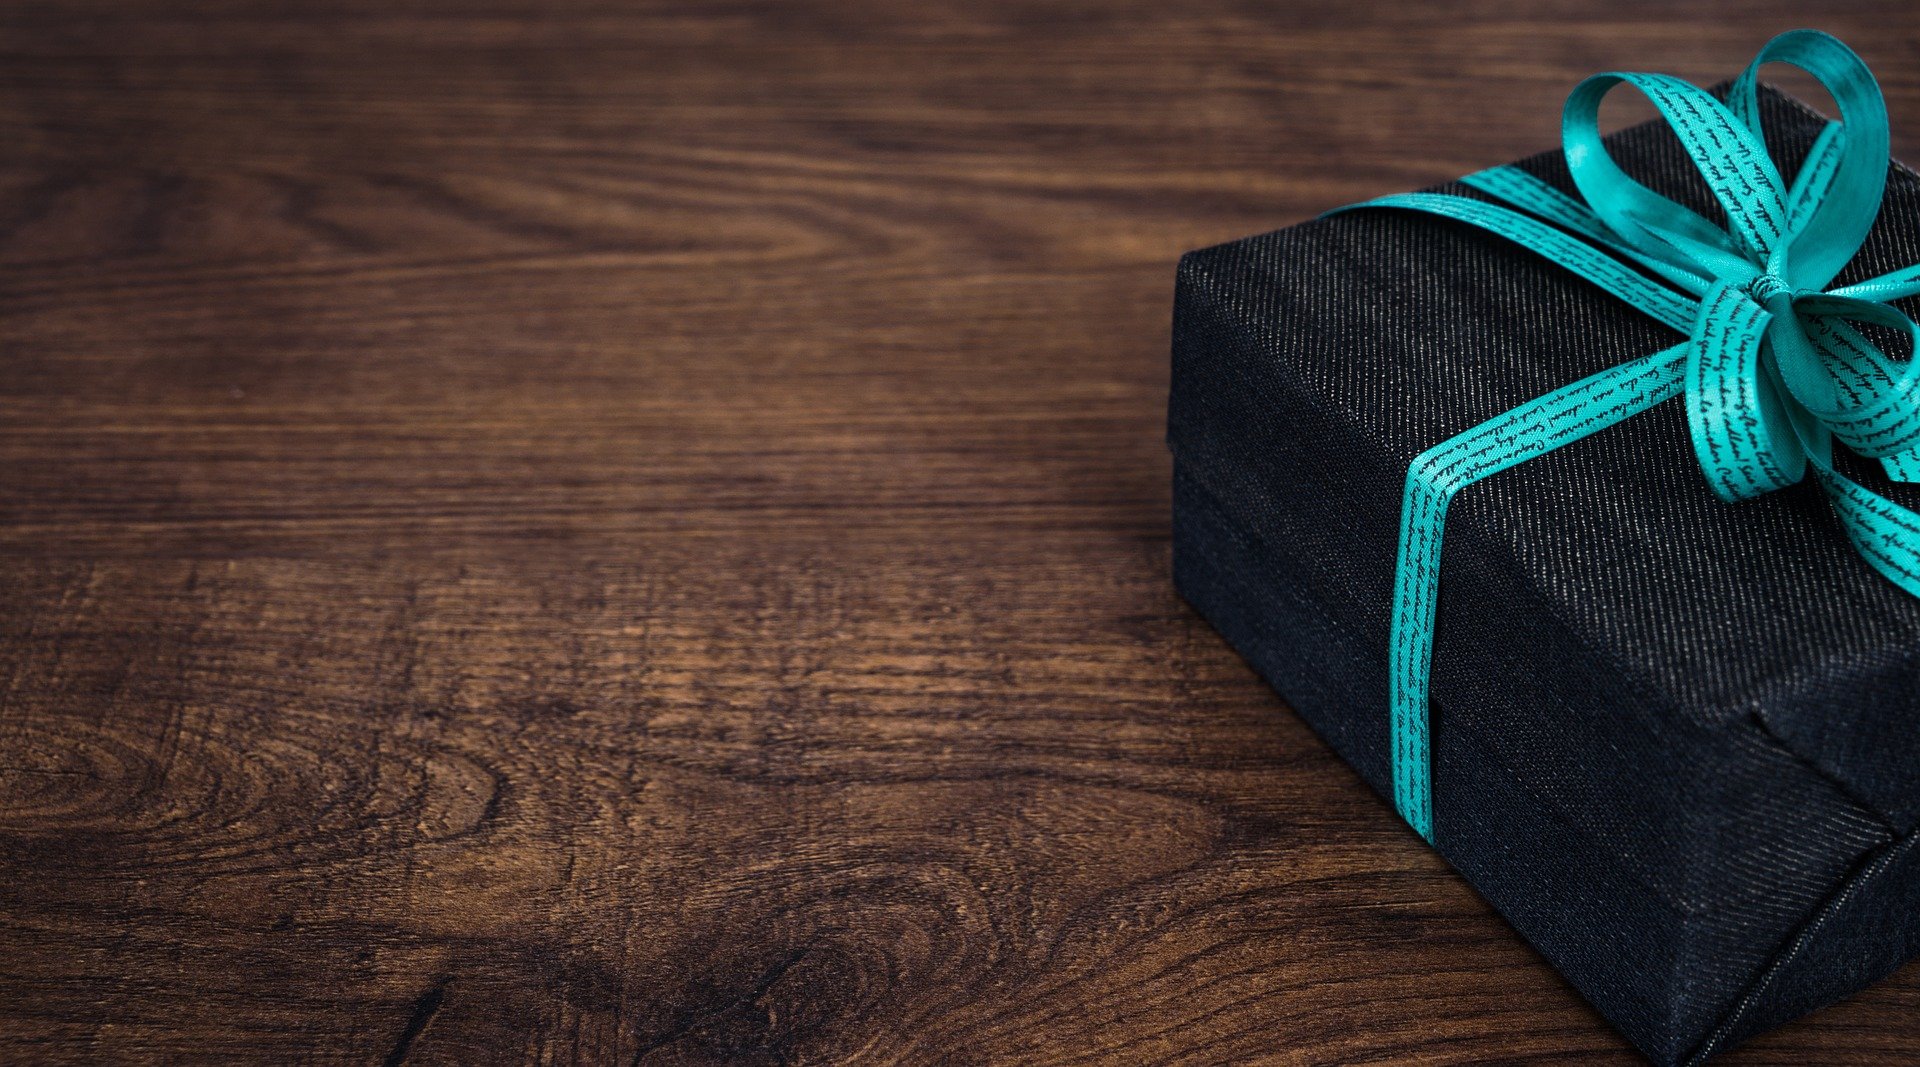 Gift wrapped in black paper with a blue bow representing Gift Tax